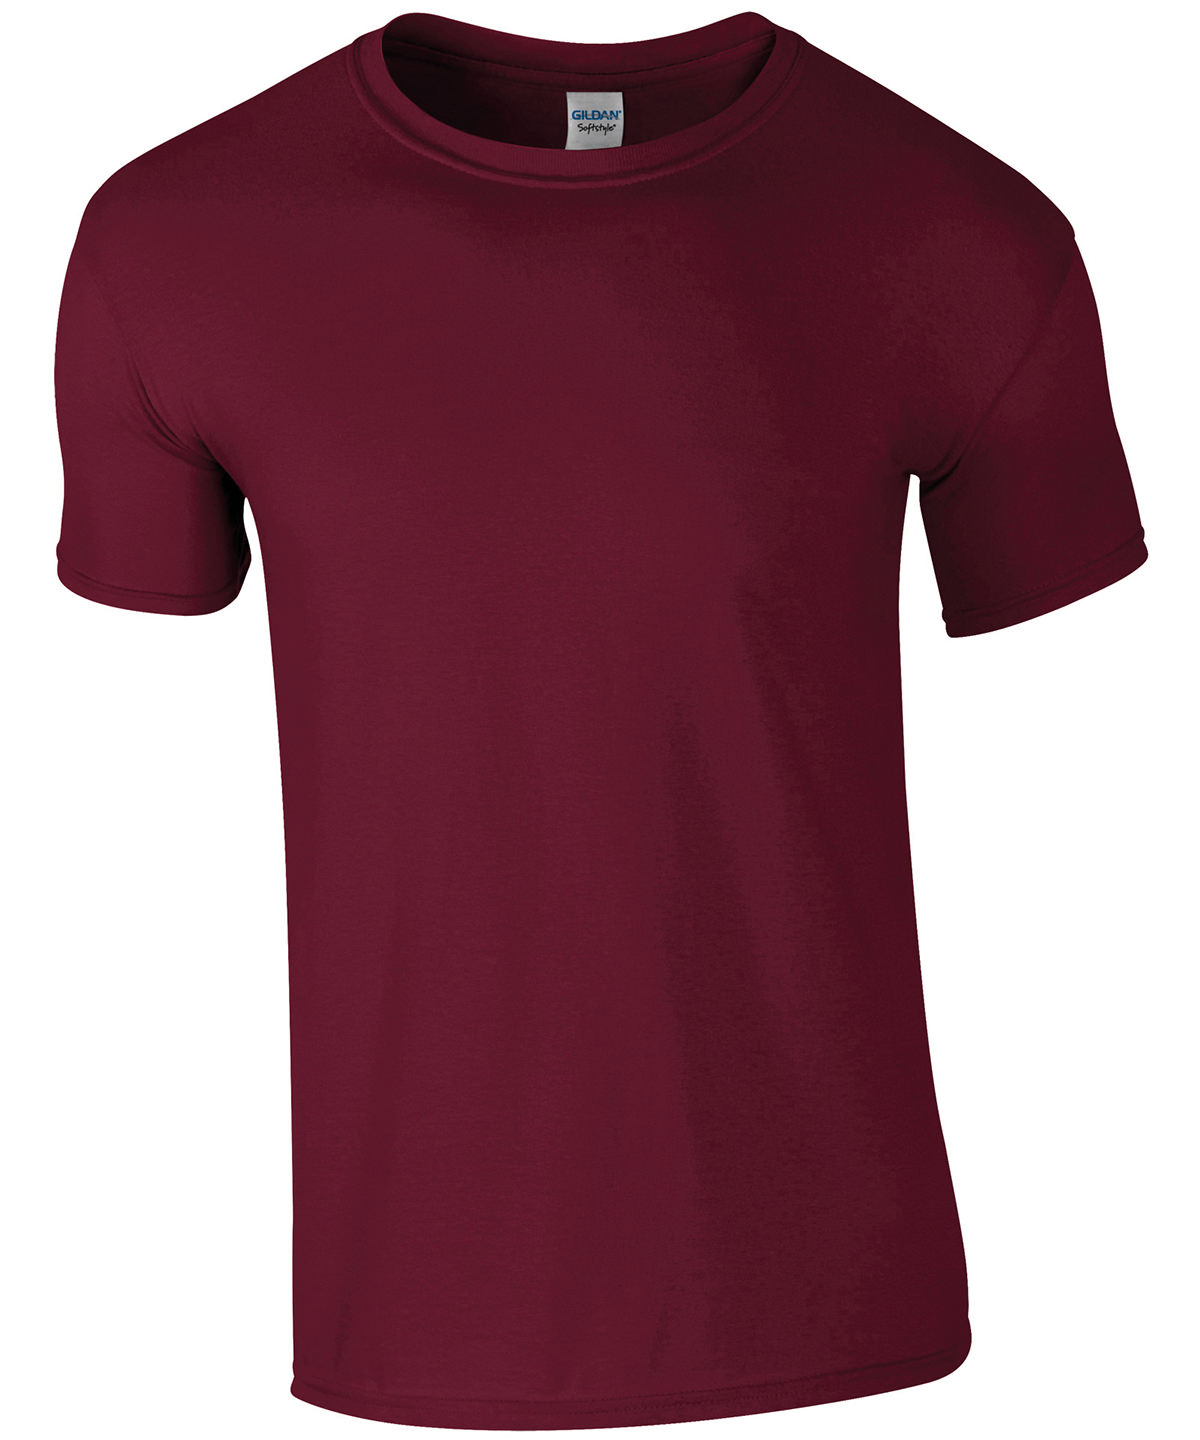 gd001 maroon ft